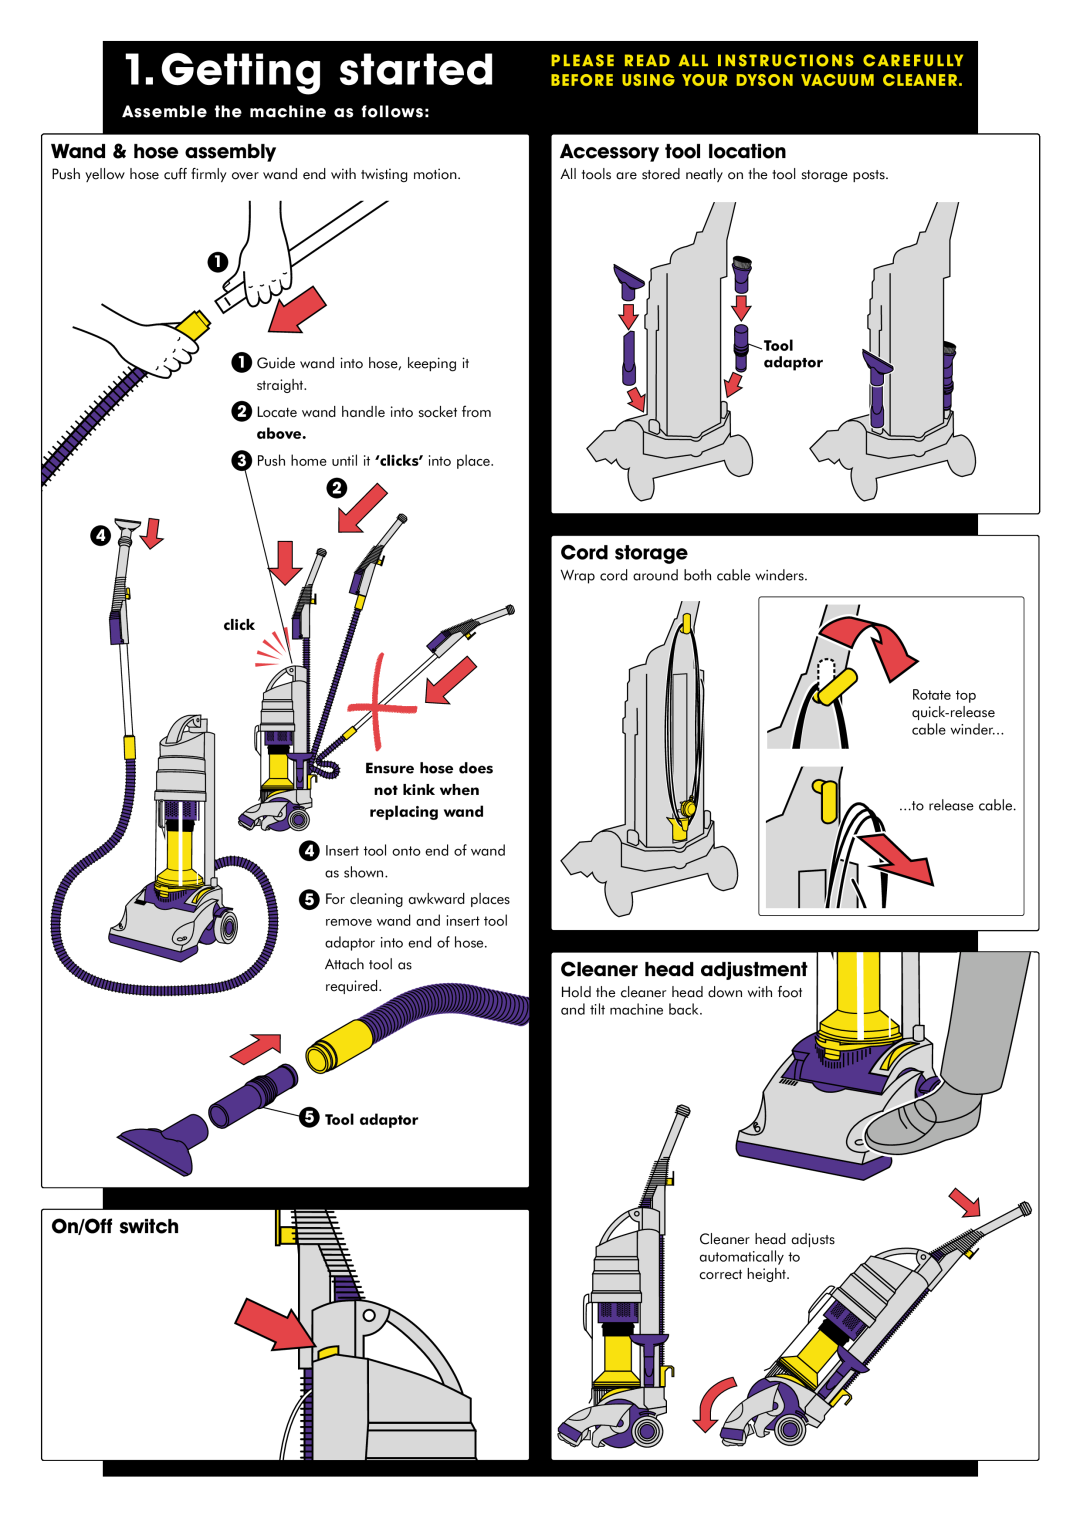 Dyson DCO1 Getting started, Wand & hose assembly, On/Off switch, Accessory tool location, Cord storage, click 